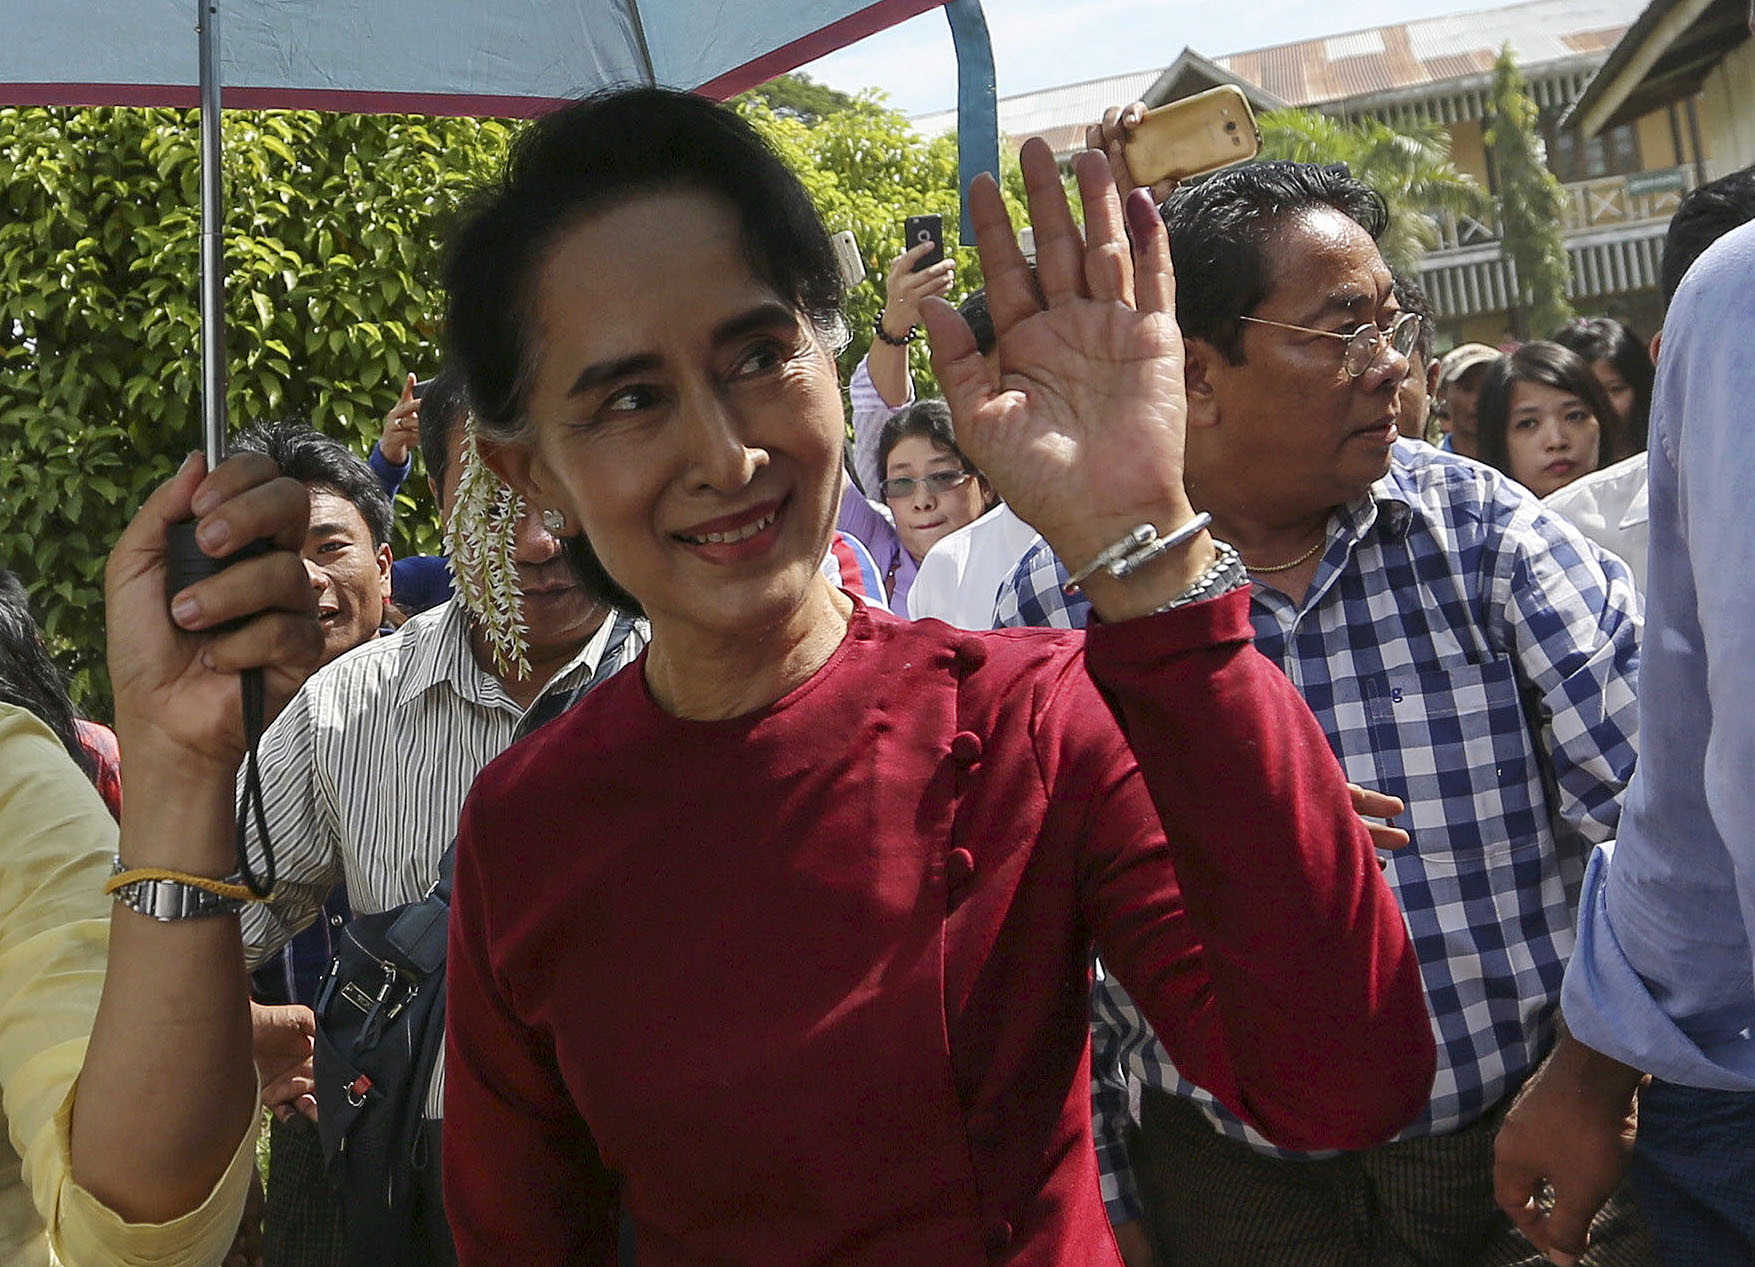 Myanmar pro-democracy leader Aung San Suu Kyi waves at supporters as she visits polling stations at her constituency Kawhmu township